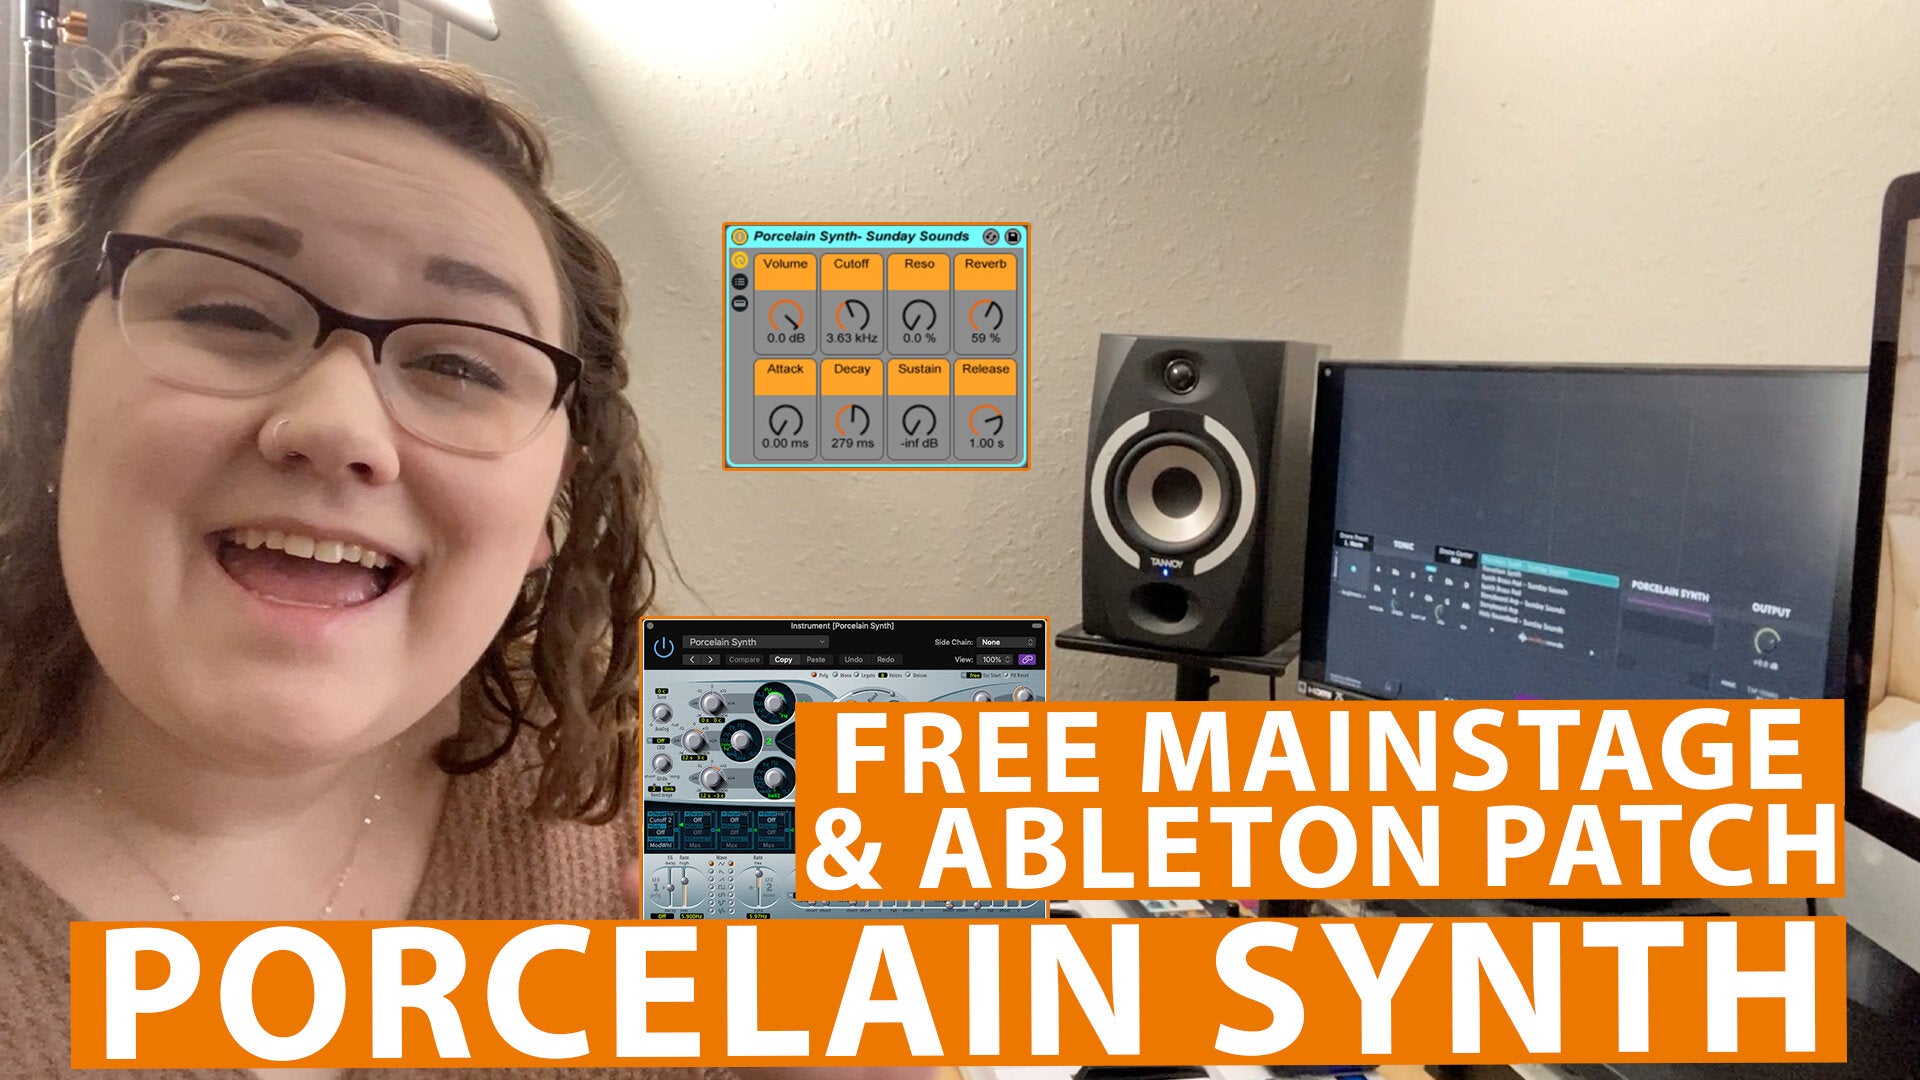 Free MainStage & Ableton Worship Patch! - Porcelain Synth